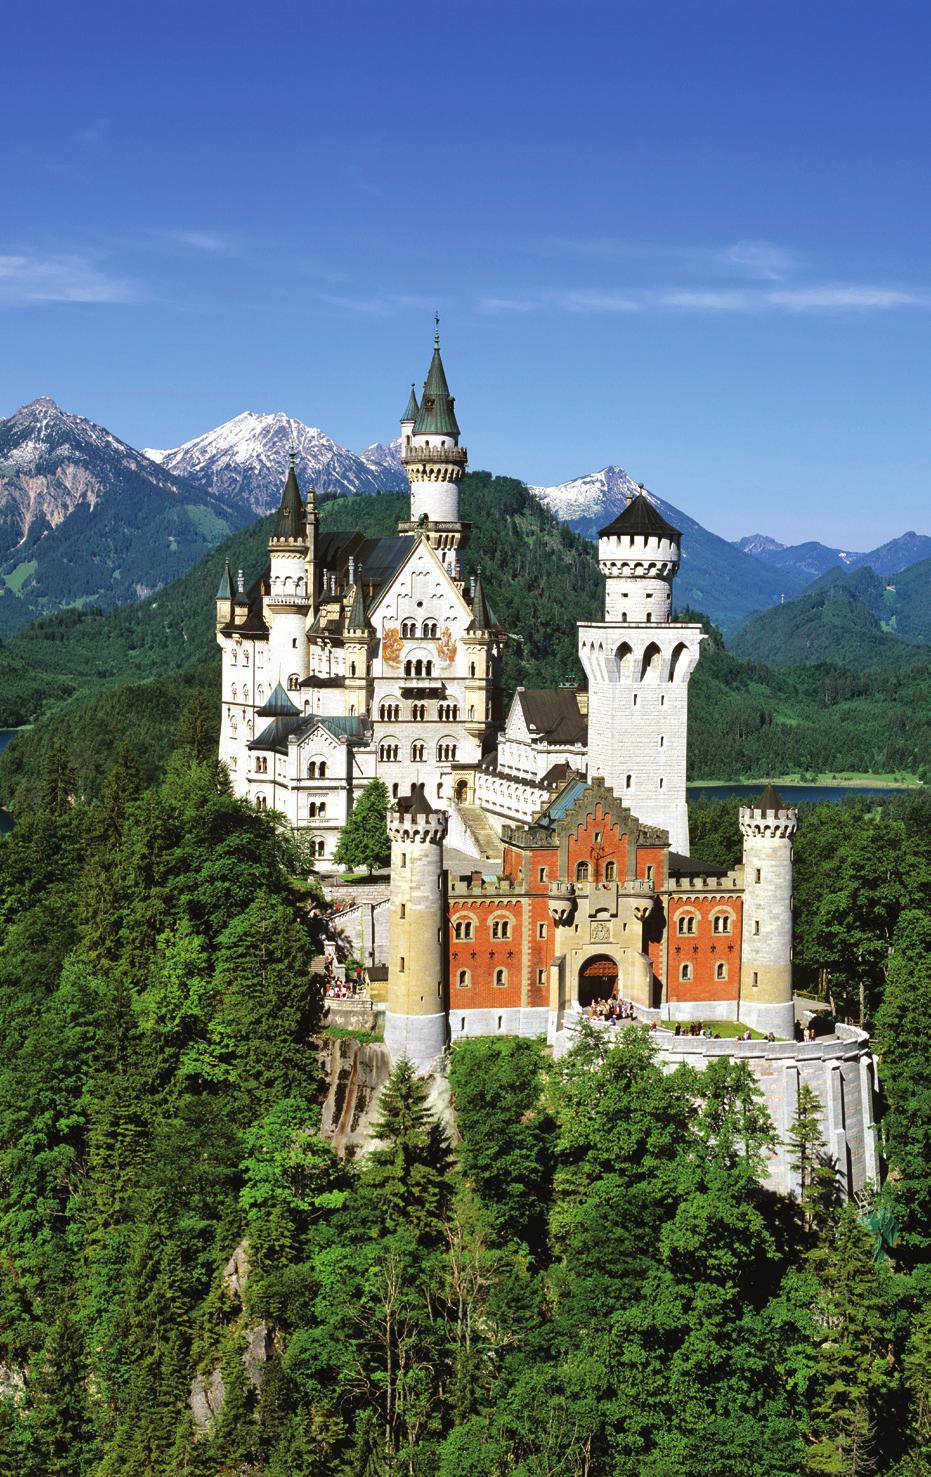 Tour membership limited to 24 Cal alumni and friends Day 8: Munich A morning sightseeing tour of Germany s most prosperous and highly livable city includes the Baroque Nymphenburg Palace, former